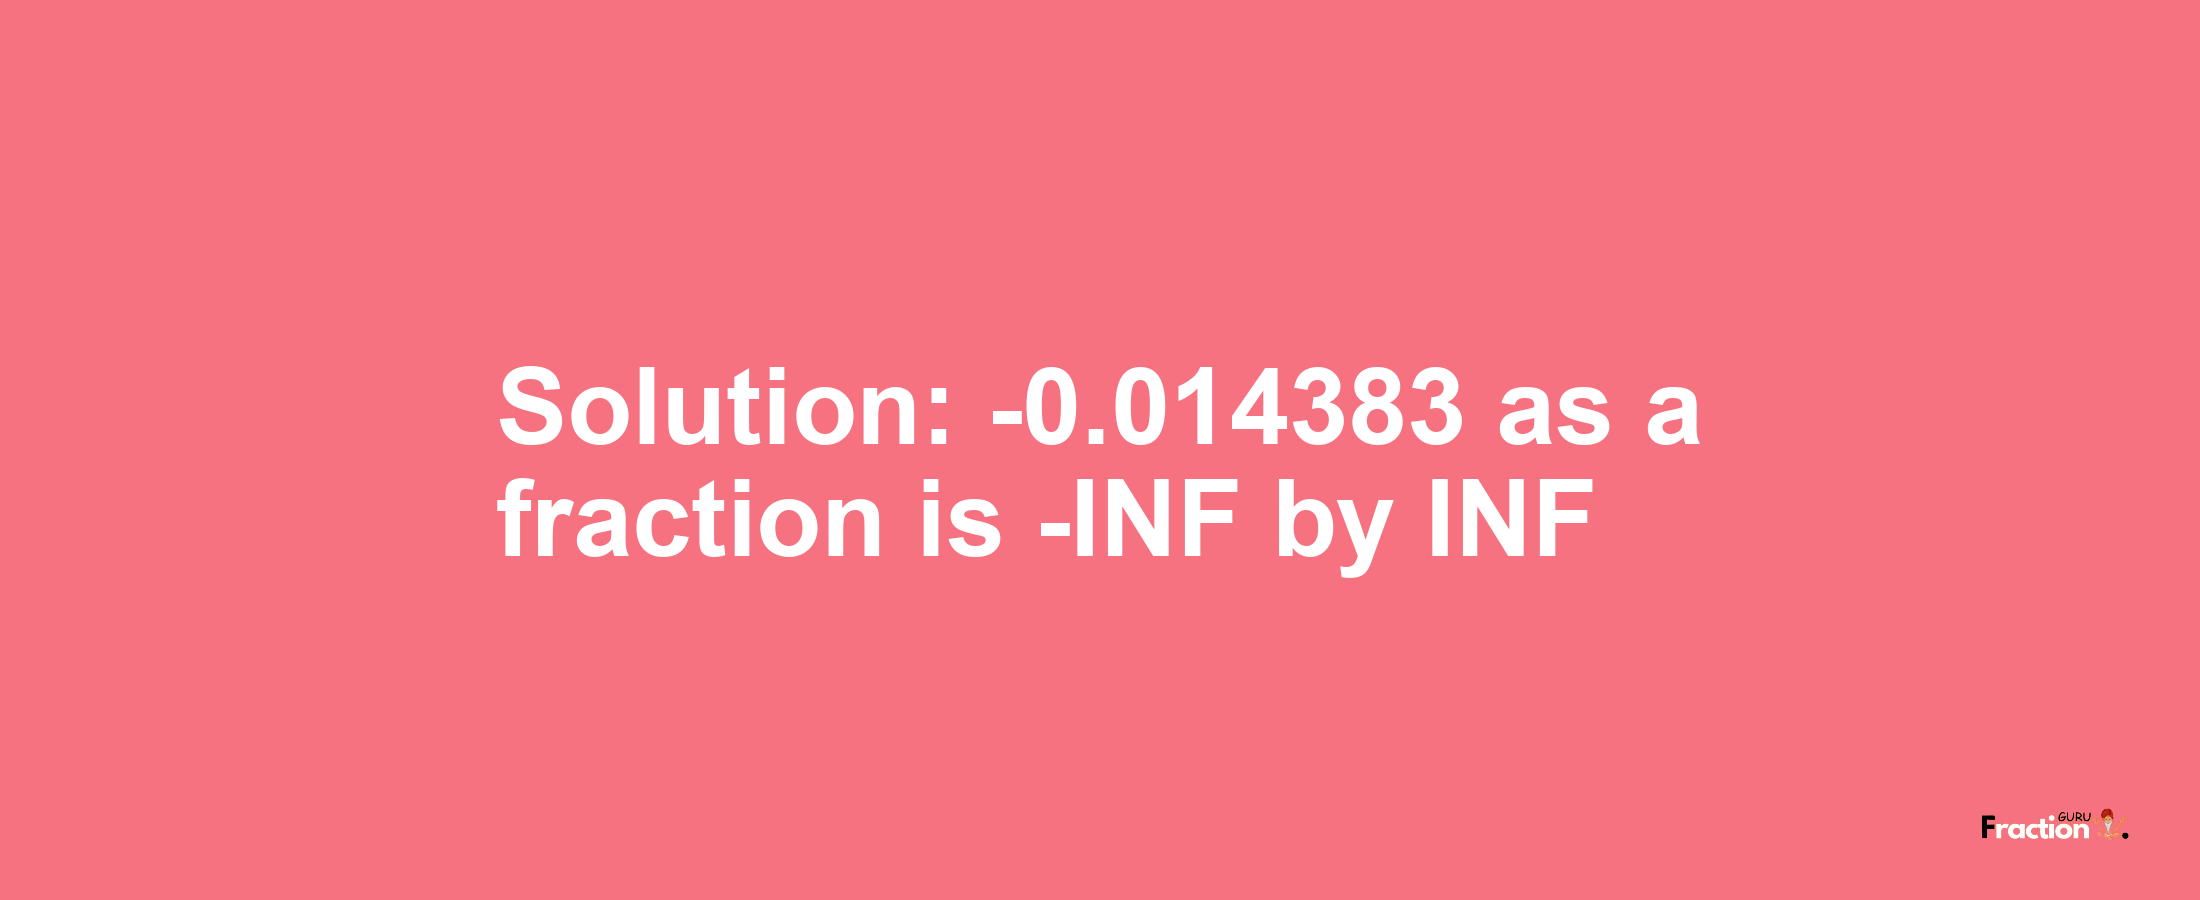 Solution:-0.014383 as a fraction is -INF/INF